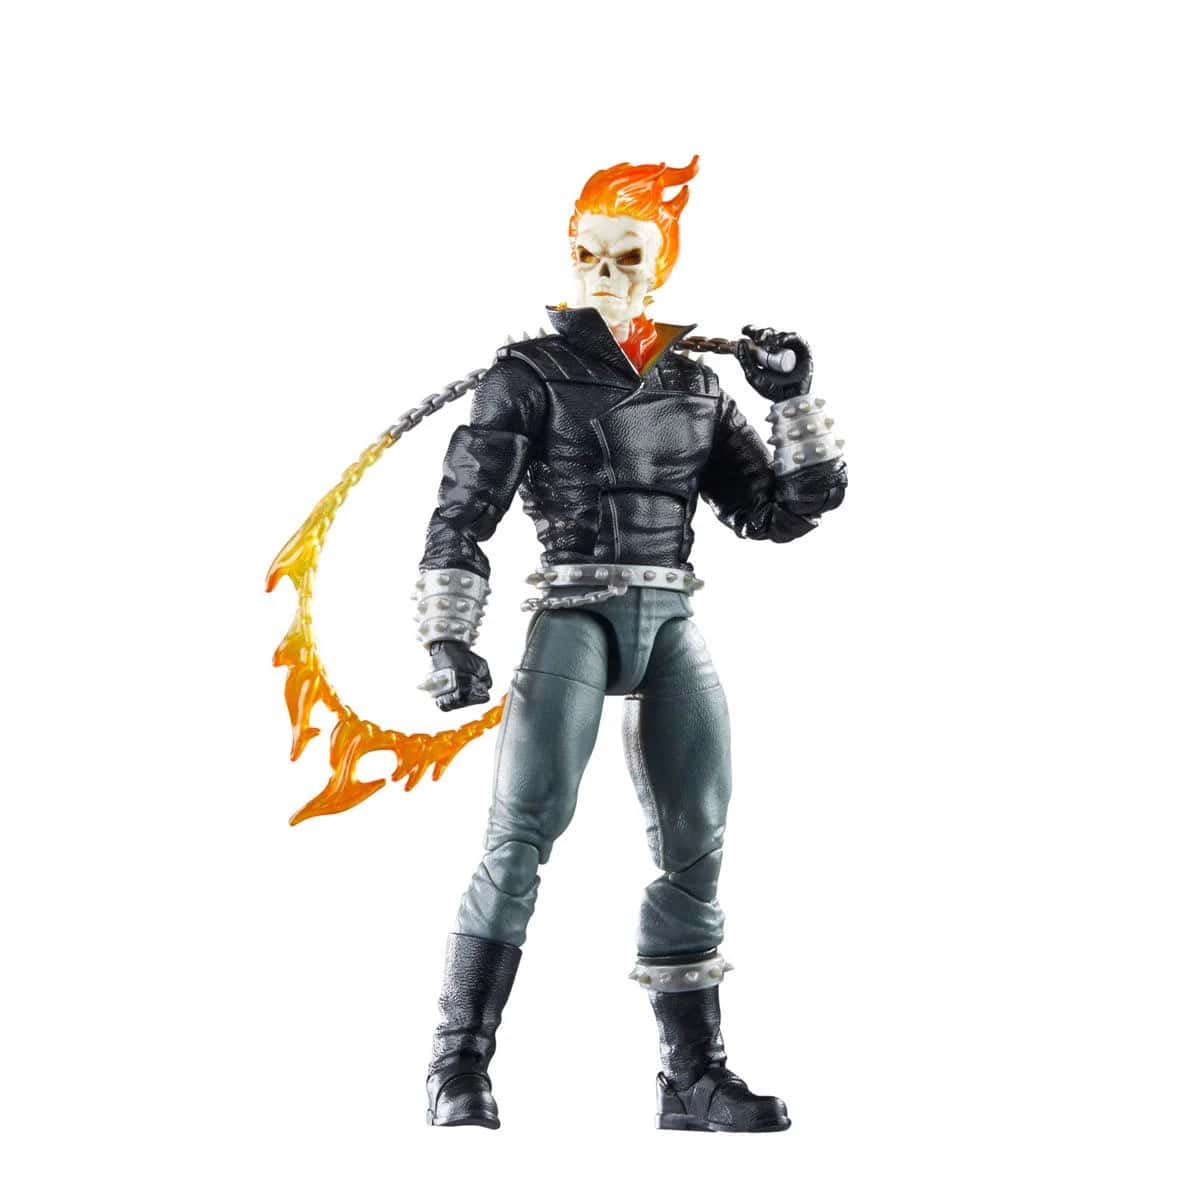 Marvel-Legends-Series-Ghost-Rider-_Danny-Ketch_-with-Motorcycle-Action-Figure-Over-Head-Figure-Pose